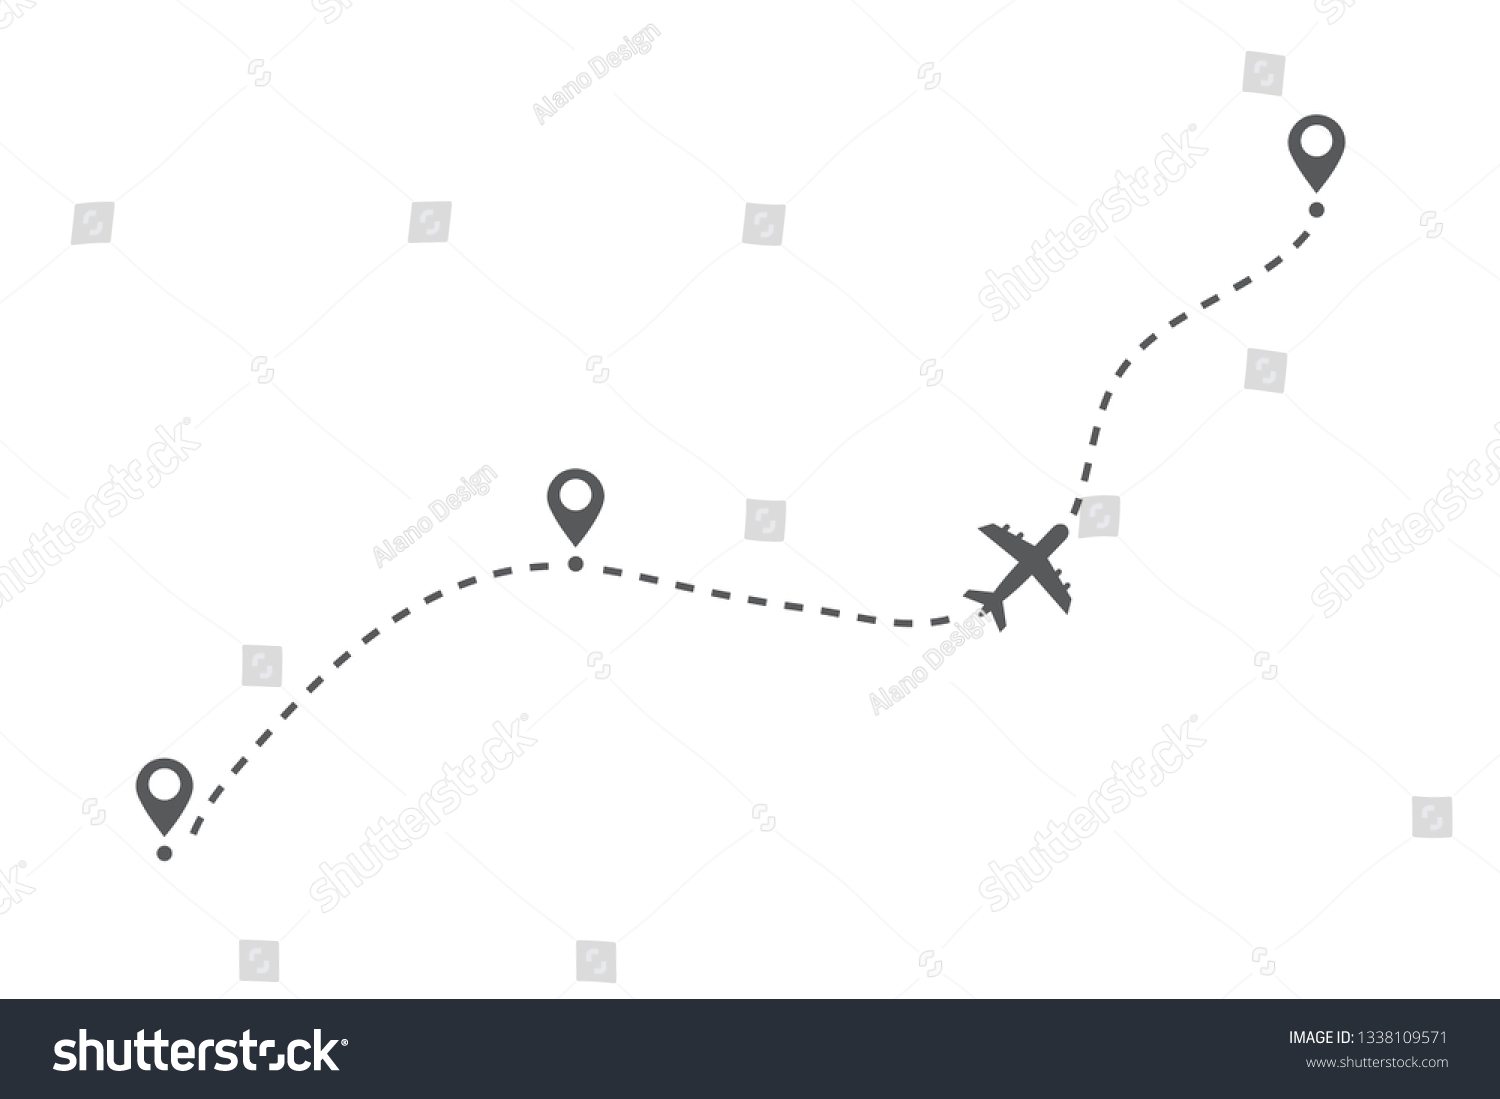 Airplane Flight Route Flight Tourism Route Path Royalty Free Stock